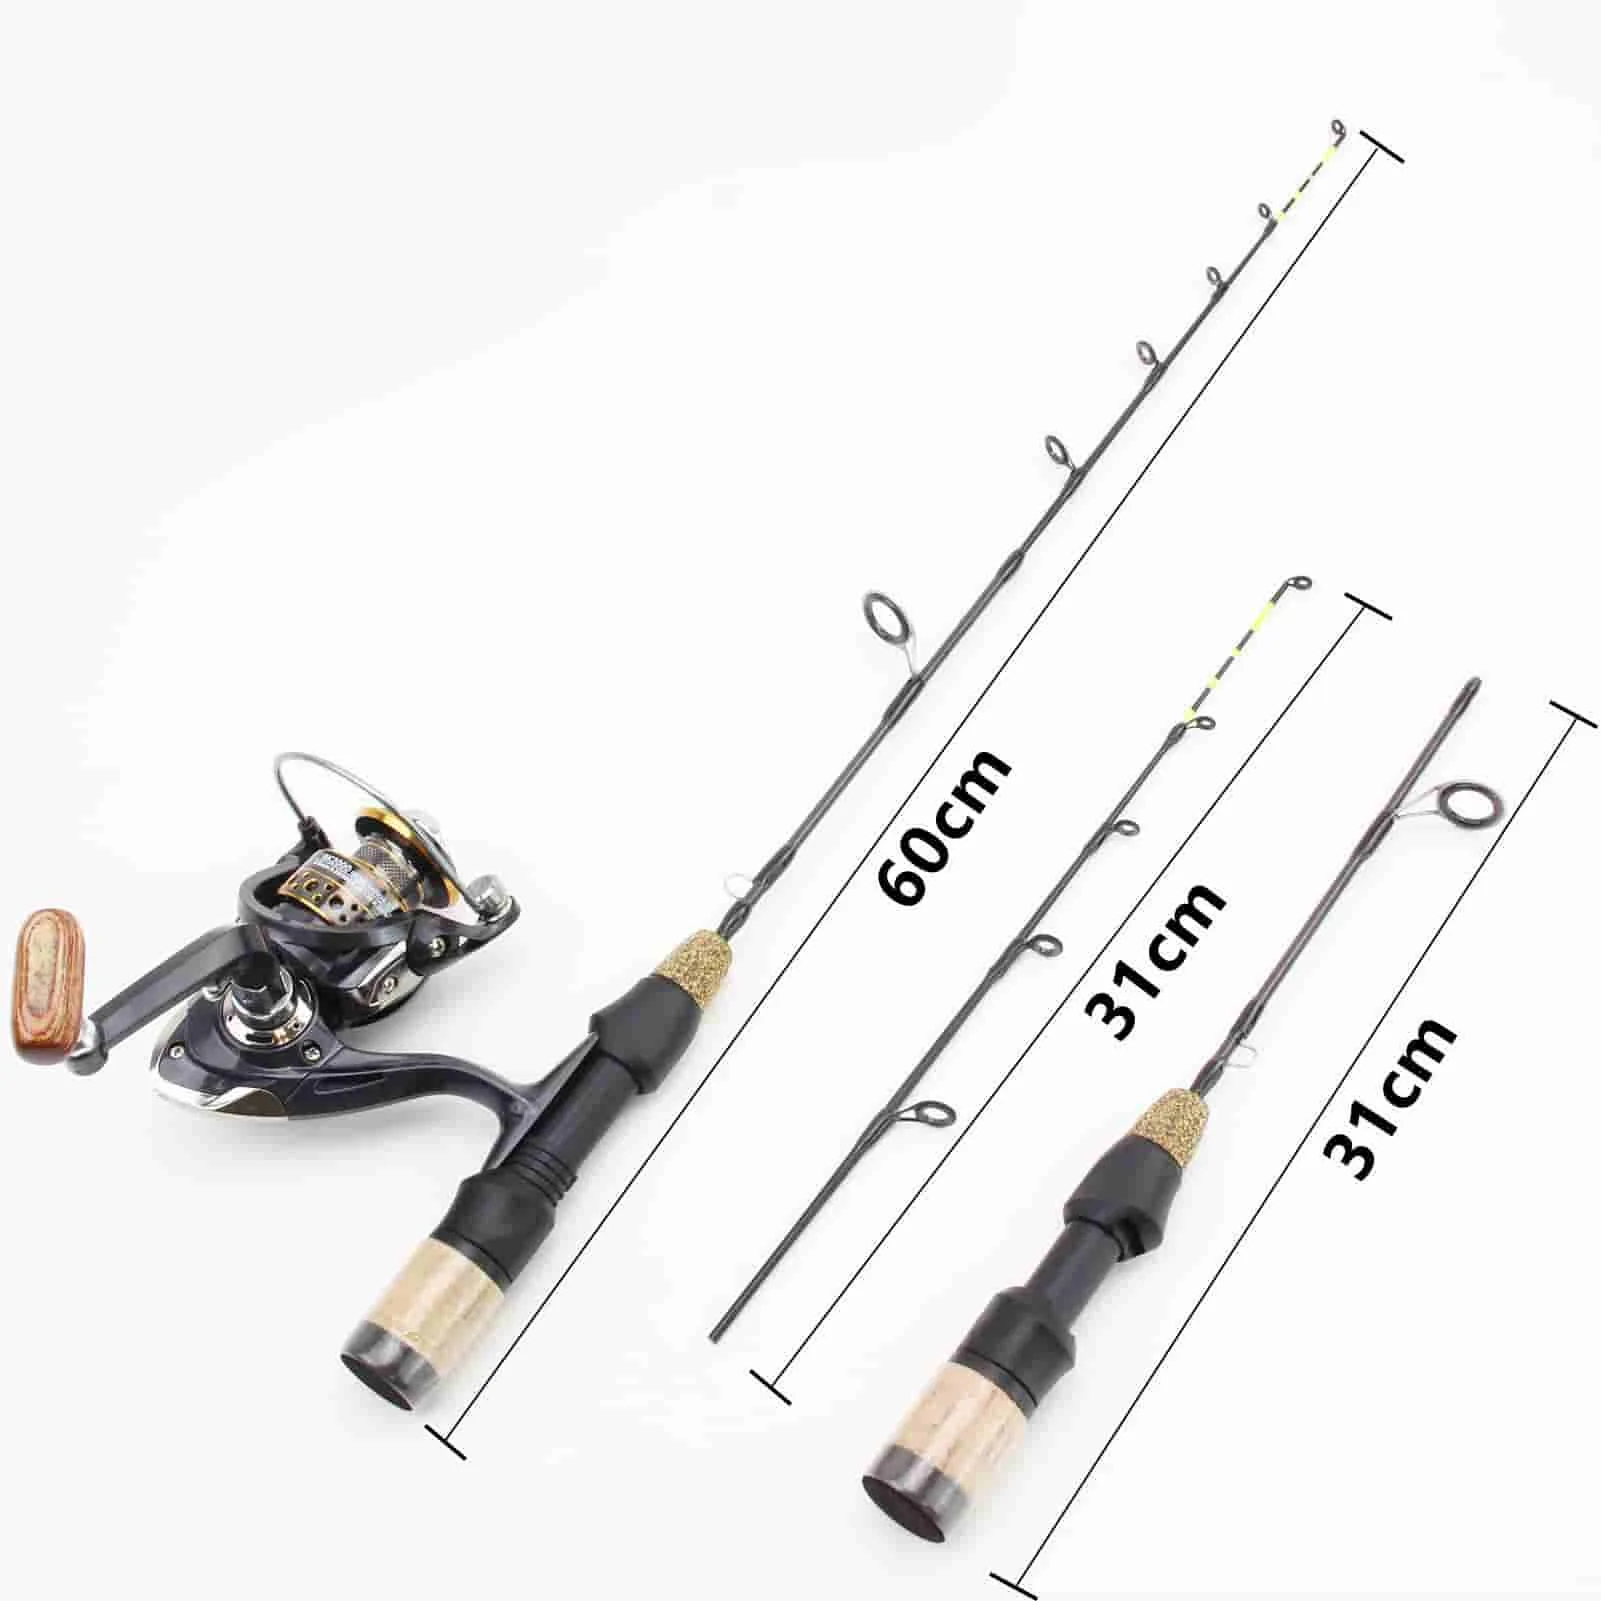 

60cm 2 sections Spinning Rod Carbon Fiber Ice pole Ultra-light Winter Ice Fishing Rods